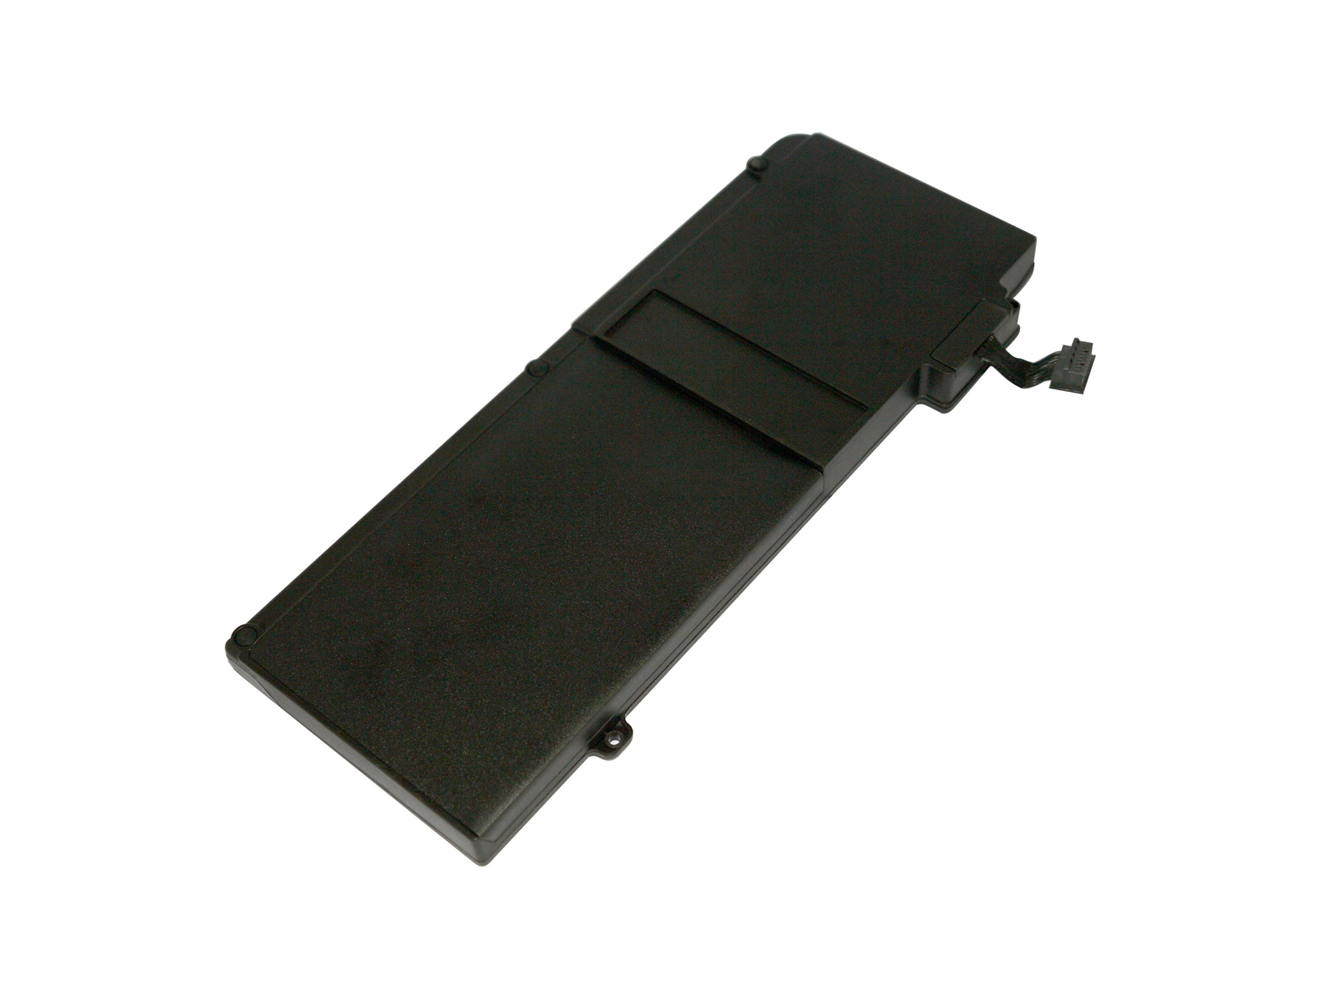 A1322 replacement Laptop Battery for Apple A1278 (2010 Baujahr Version), MacBook Pro 13